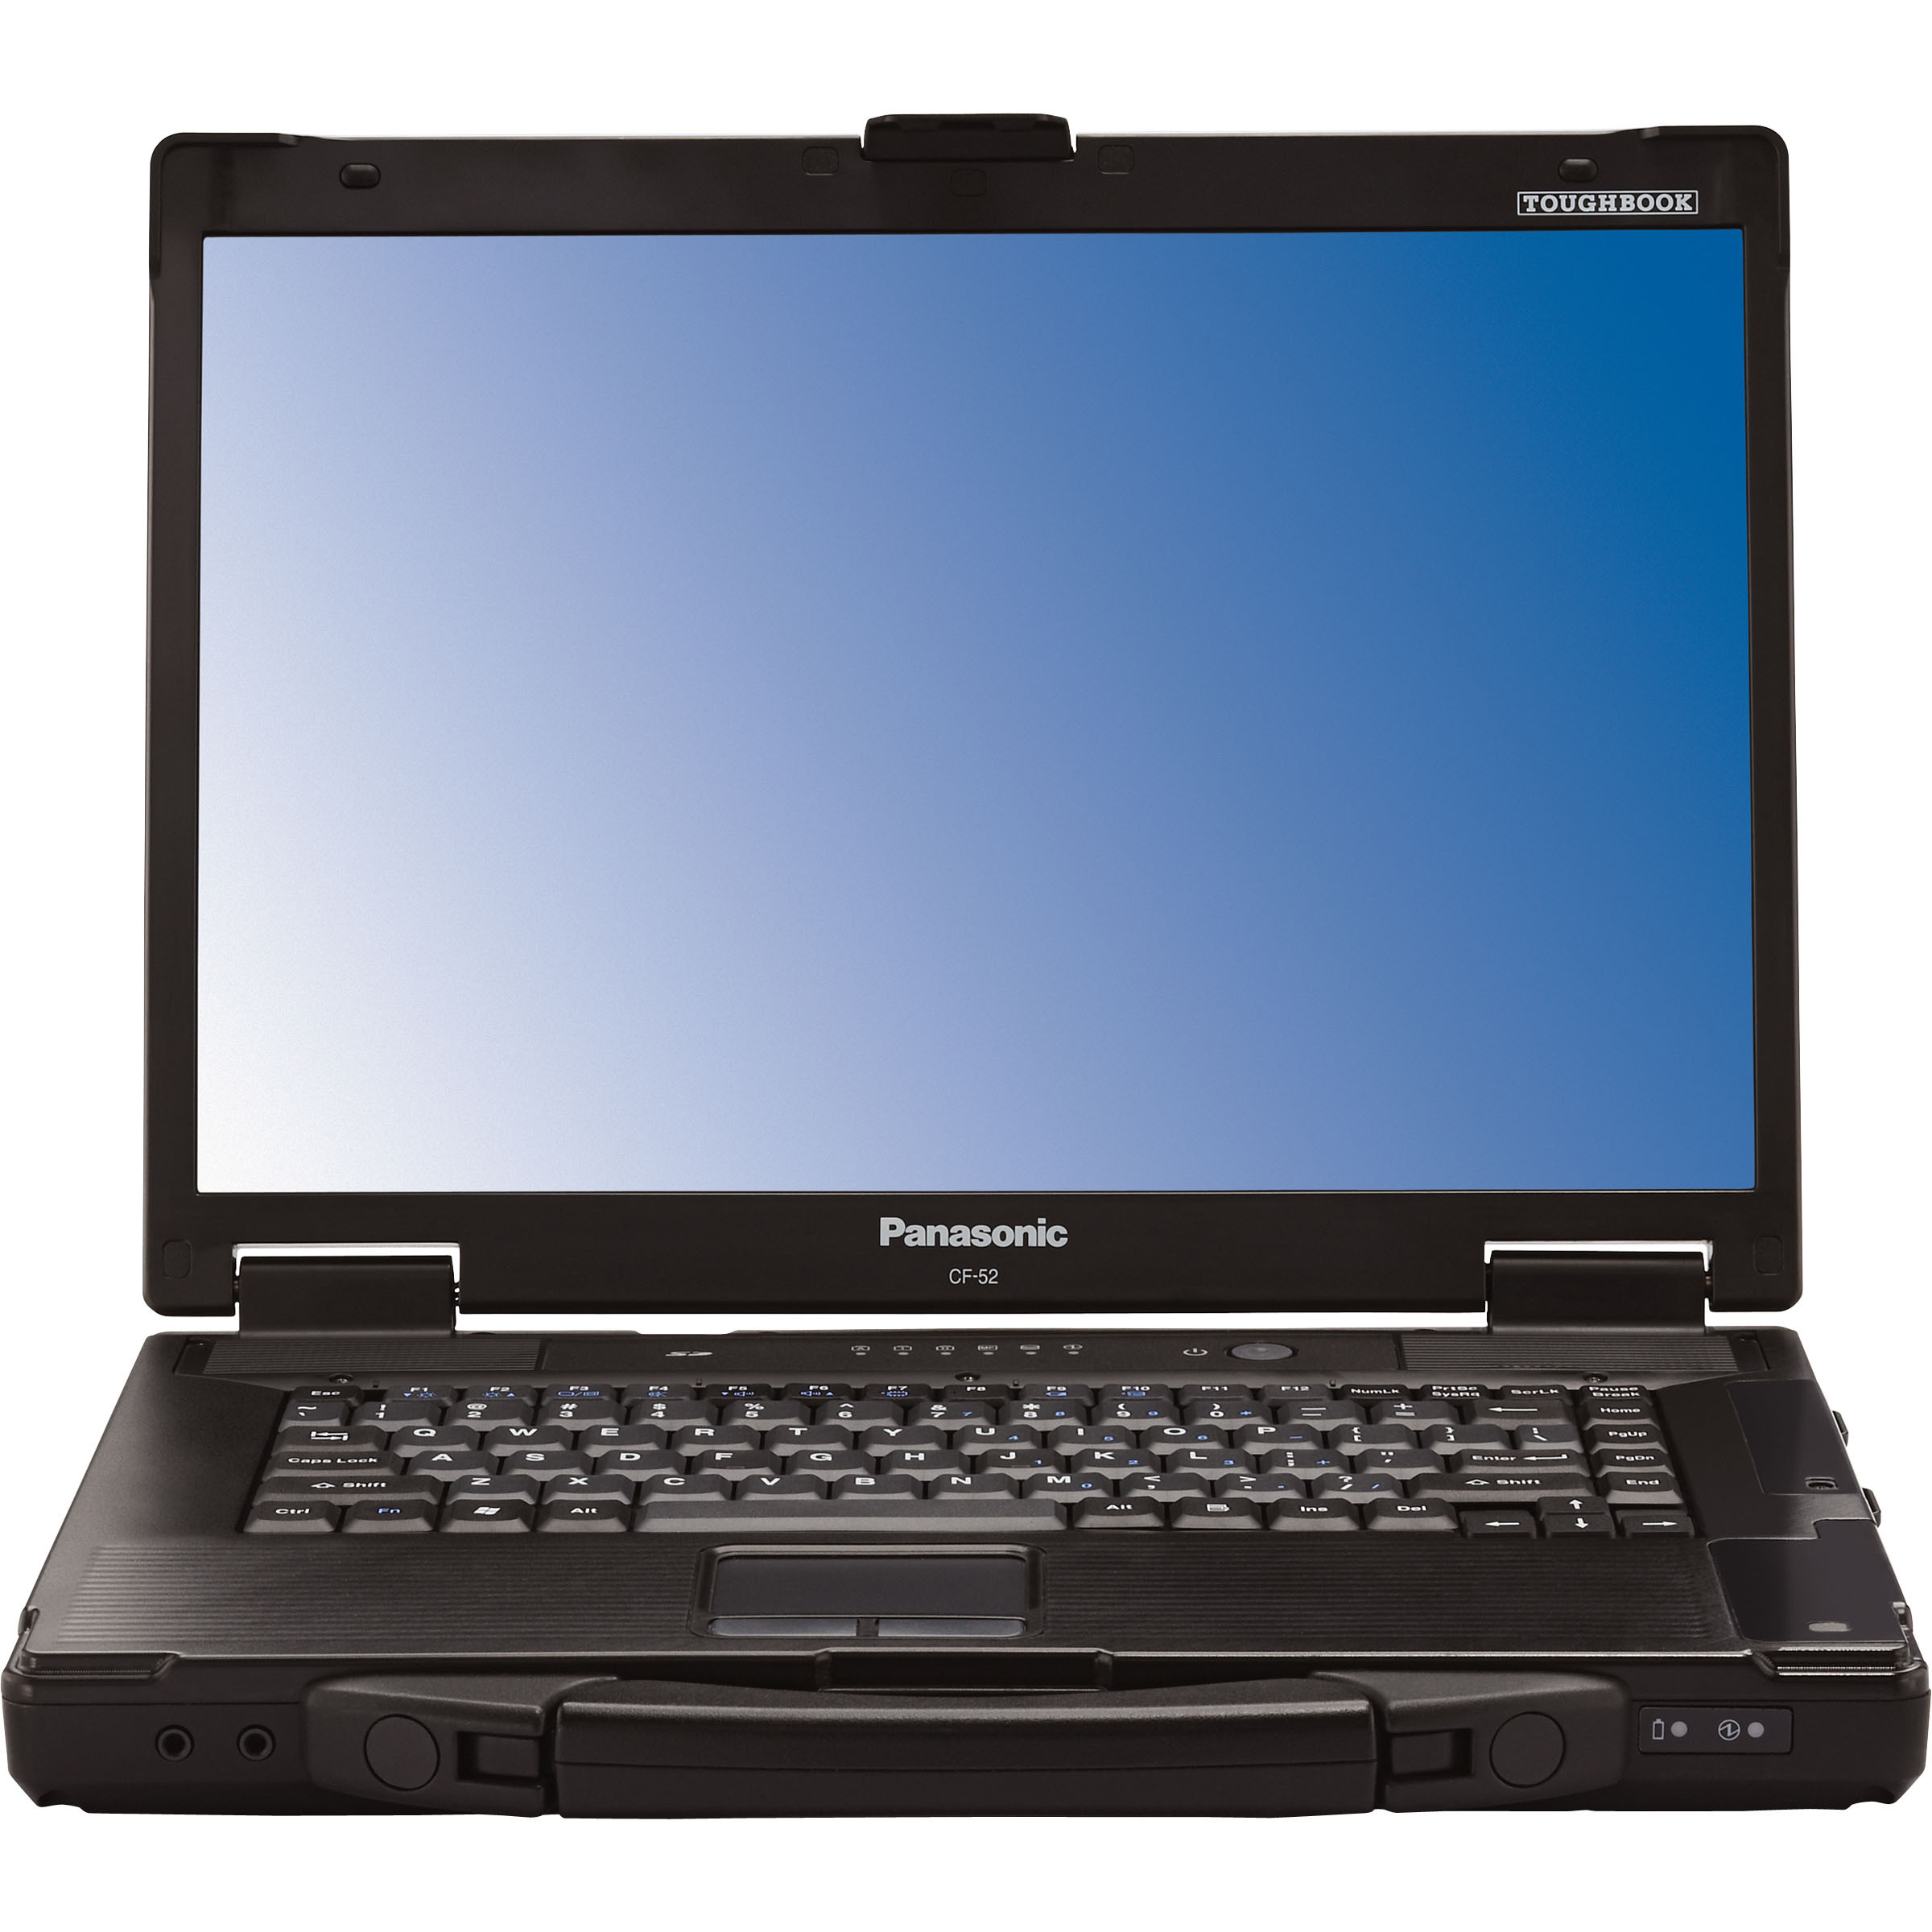 Panasonic Toughbook CF-52NKE102M 15.4" Notebook - Intel Core i5 i5-540M 2.53 GHz 4 GB Ram 250 GB HDD Win 7 pro - USED with FREE 3 Year Warranty provided by CPS. - image 2 of 2